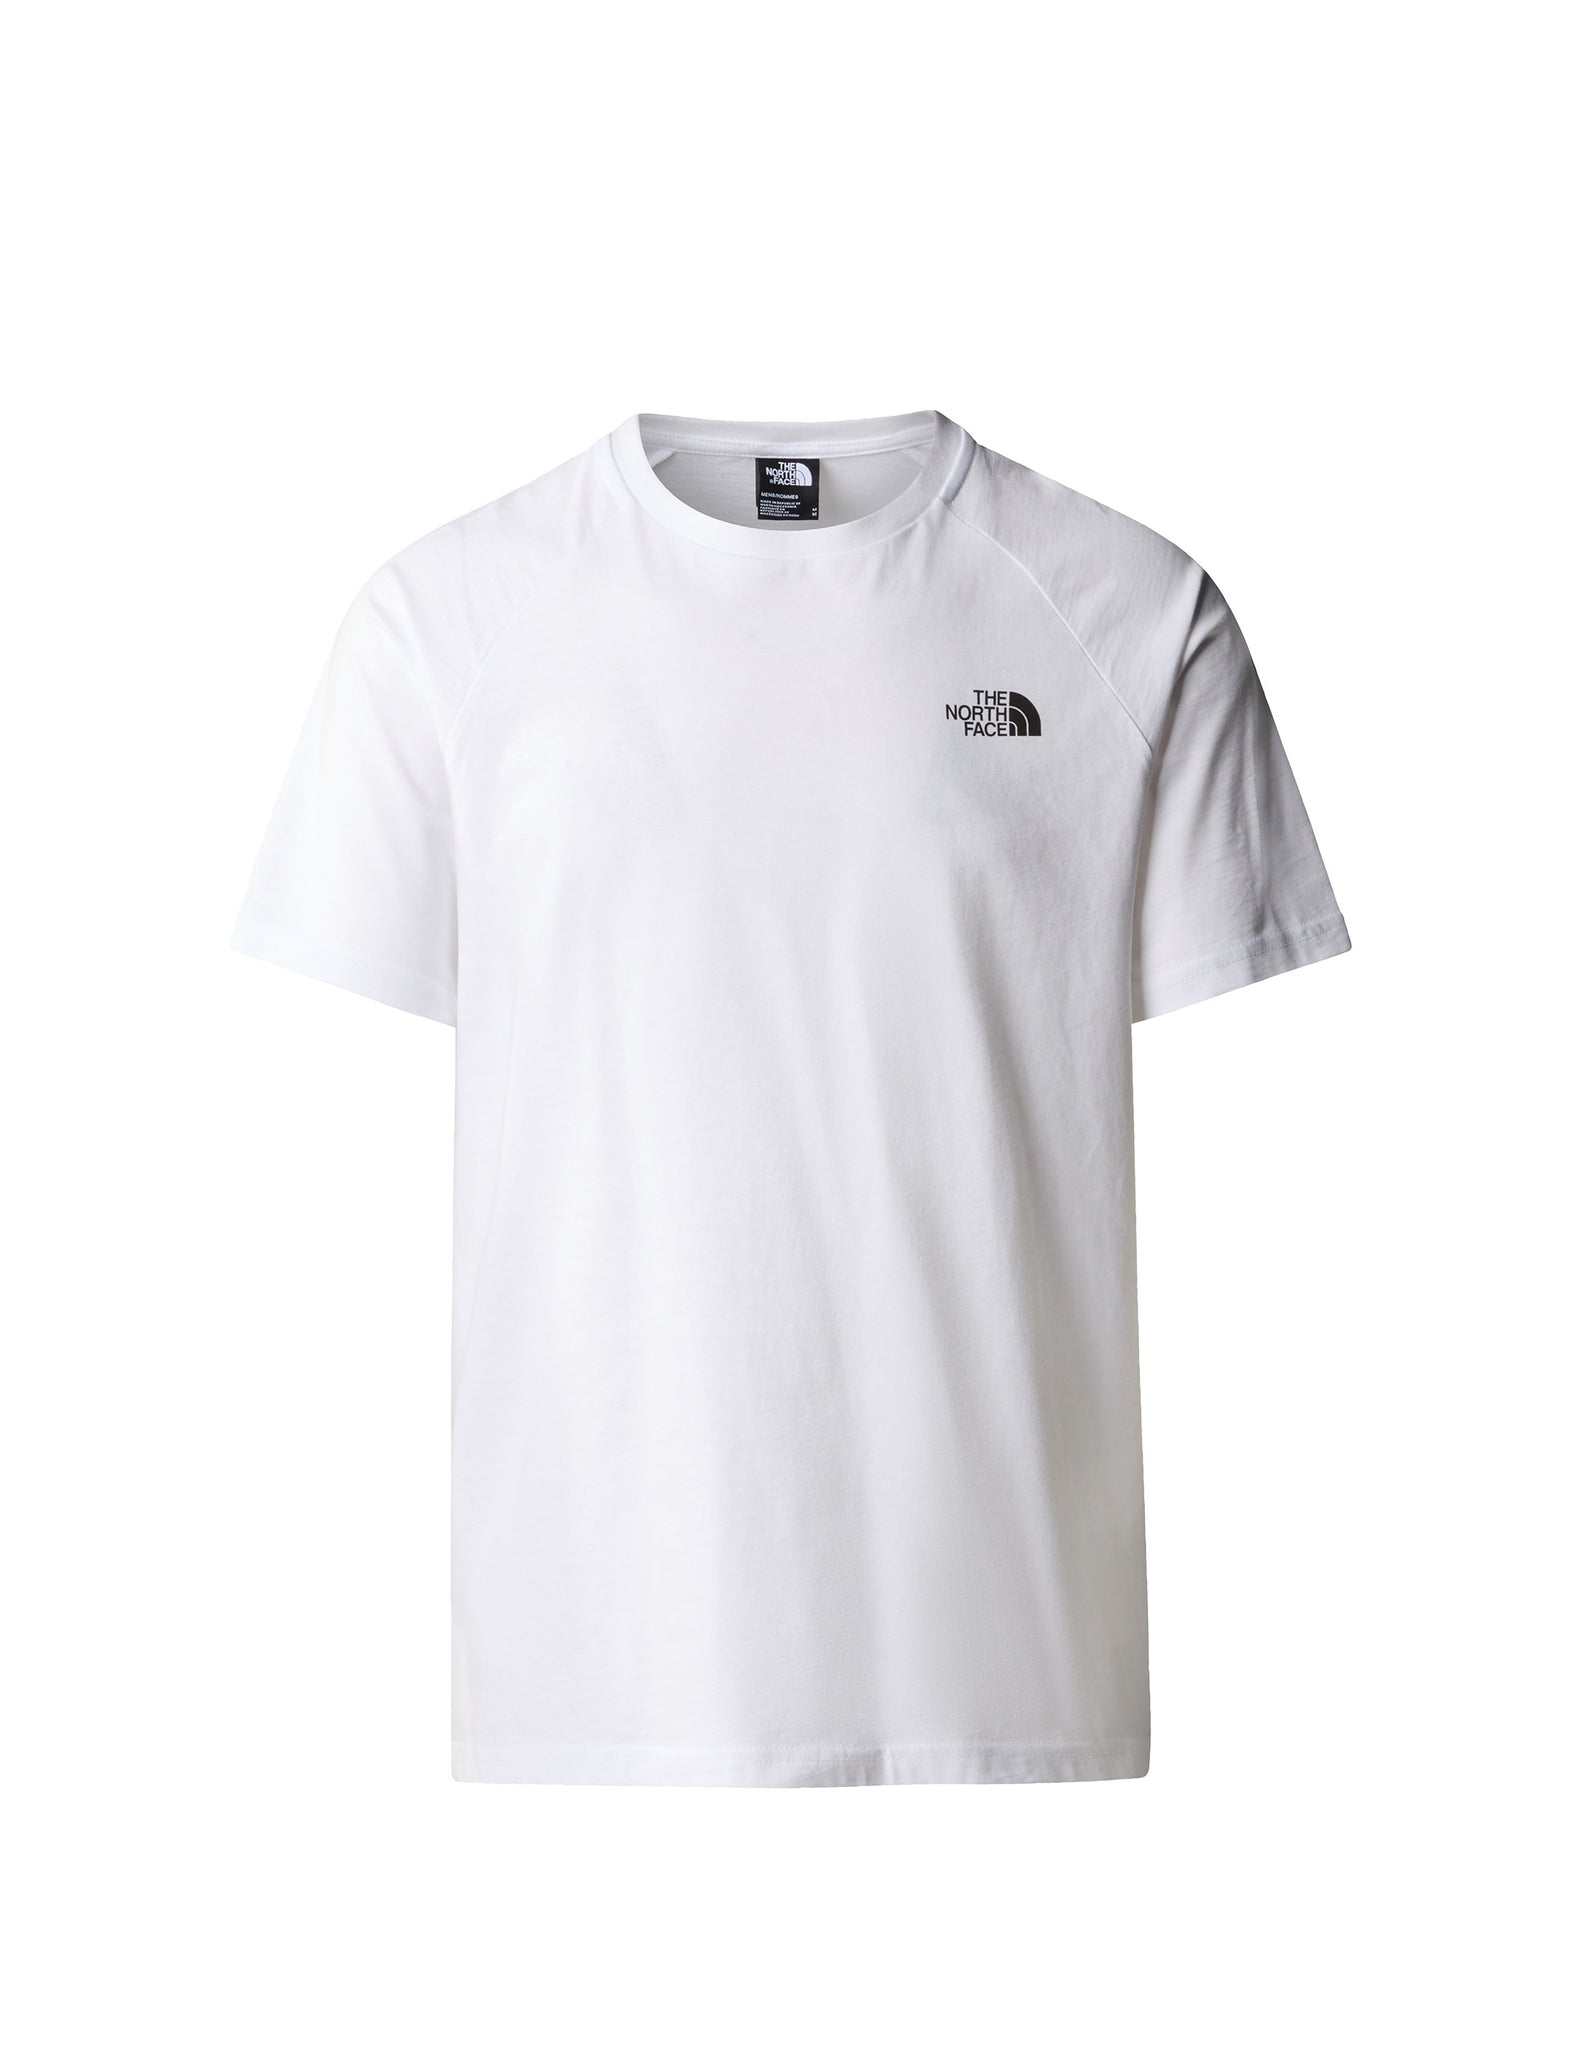 The North Face Men'S North Faces Tee White